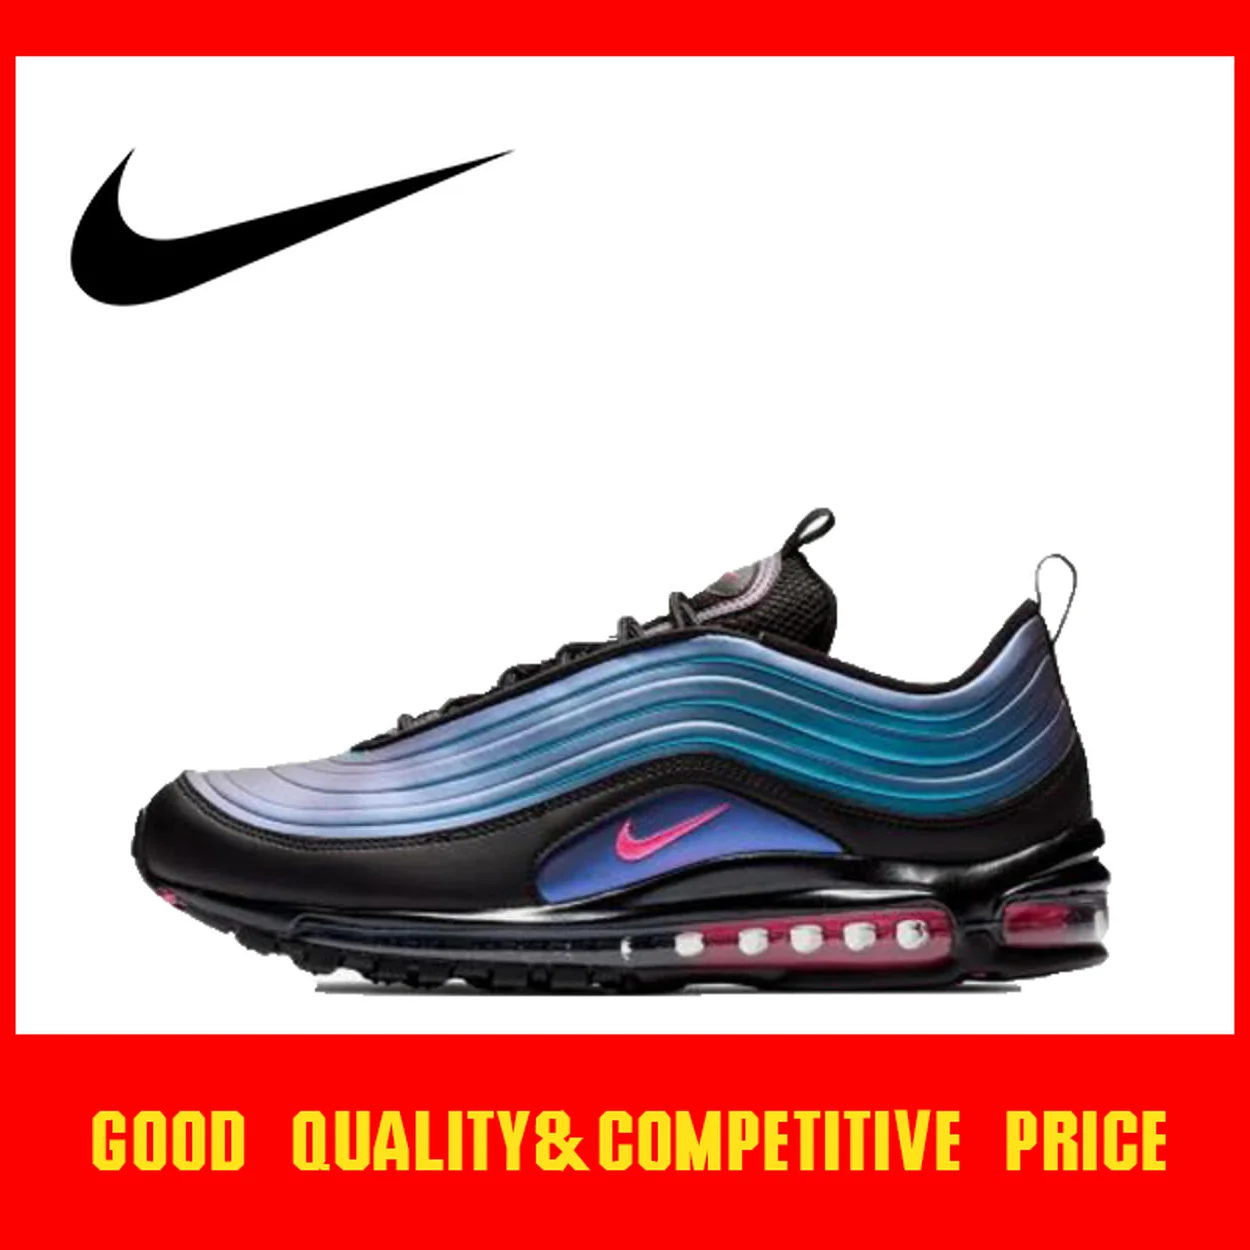 

Original Authentic Nike Air Max 97 LX Men's Running Shoes Classic Outdoor Reflective Sports Shoes 2019 New Listing AV1165-001